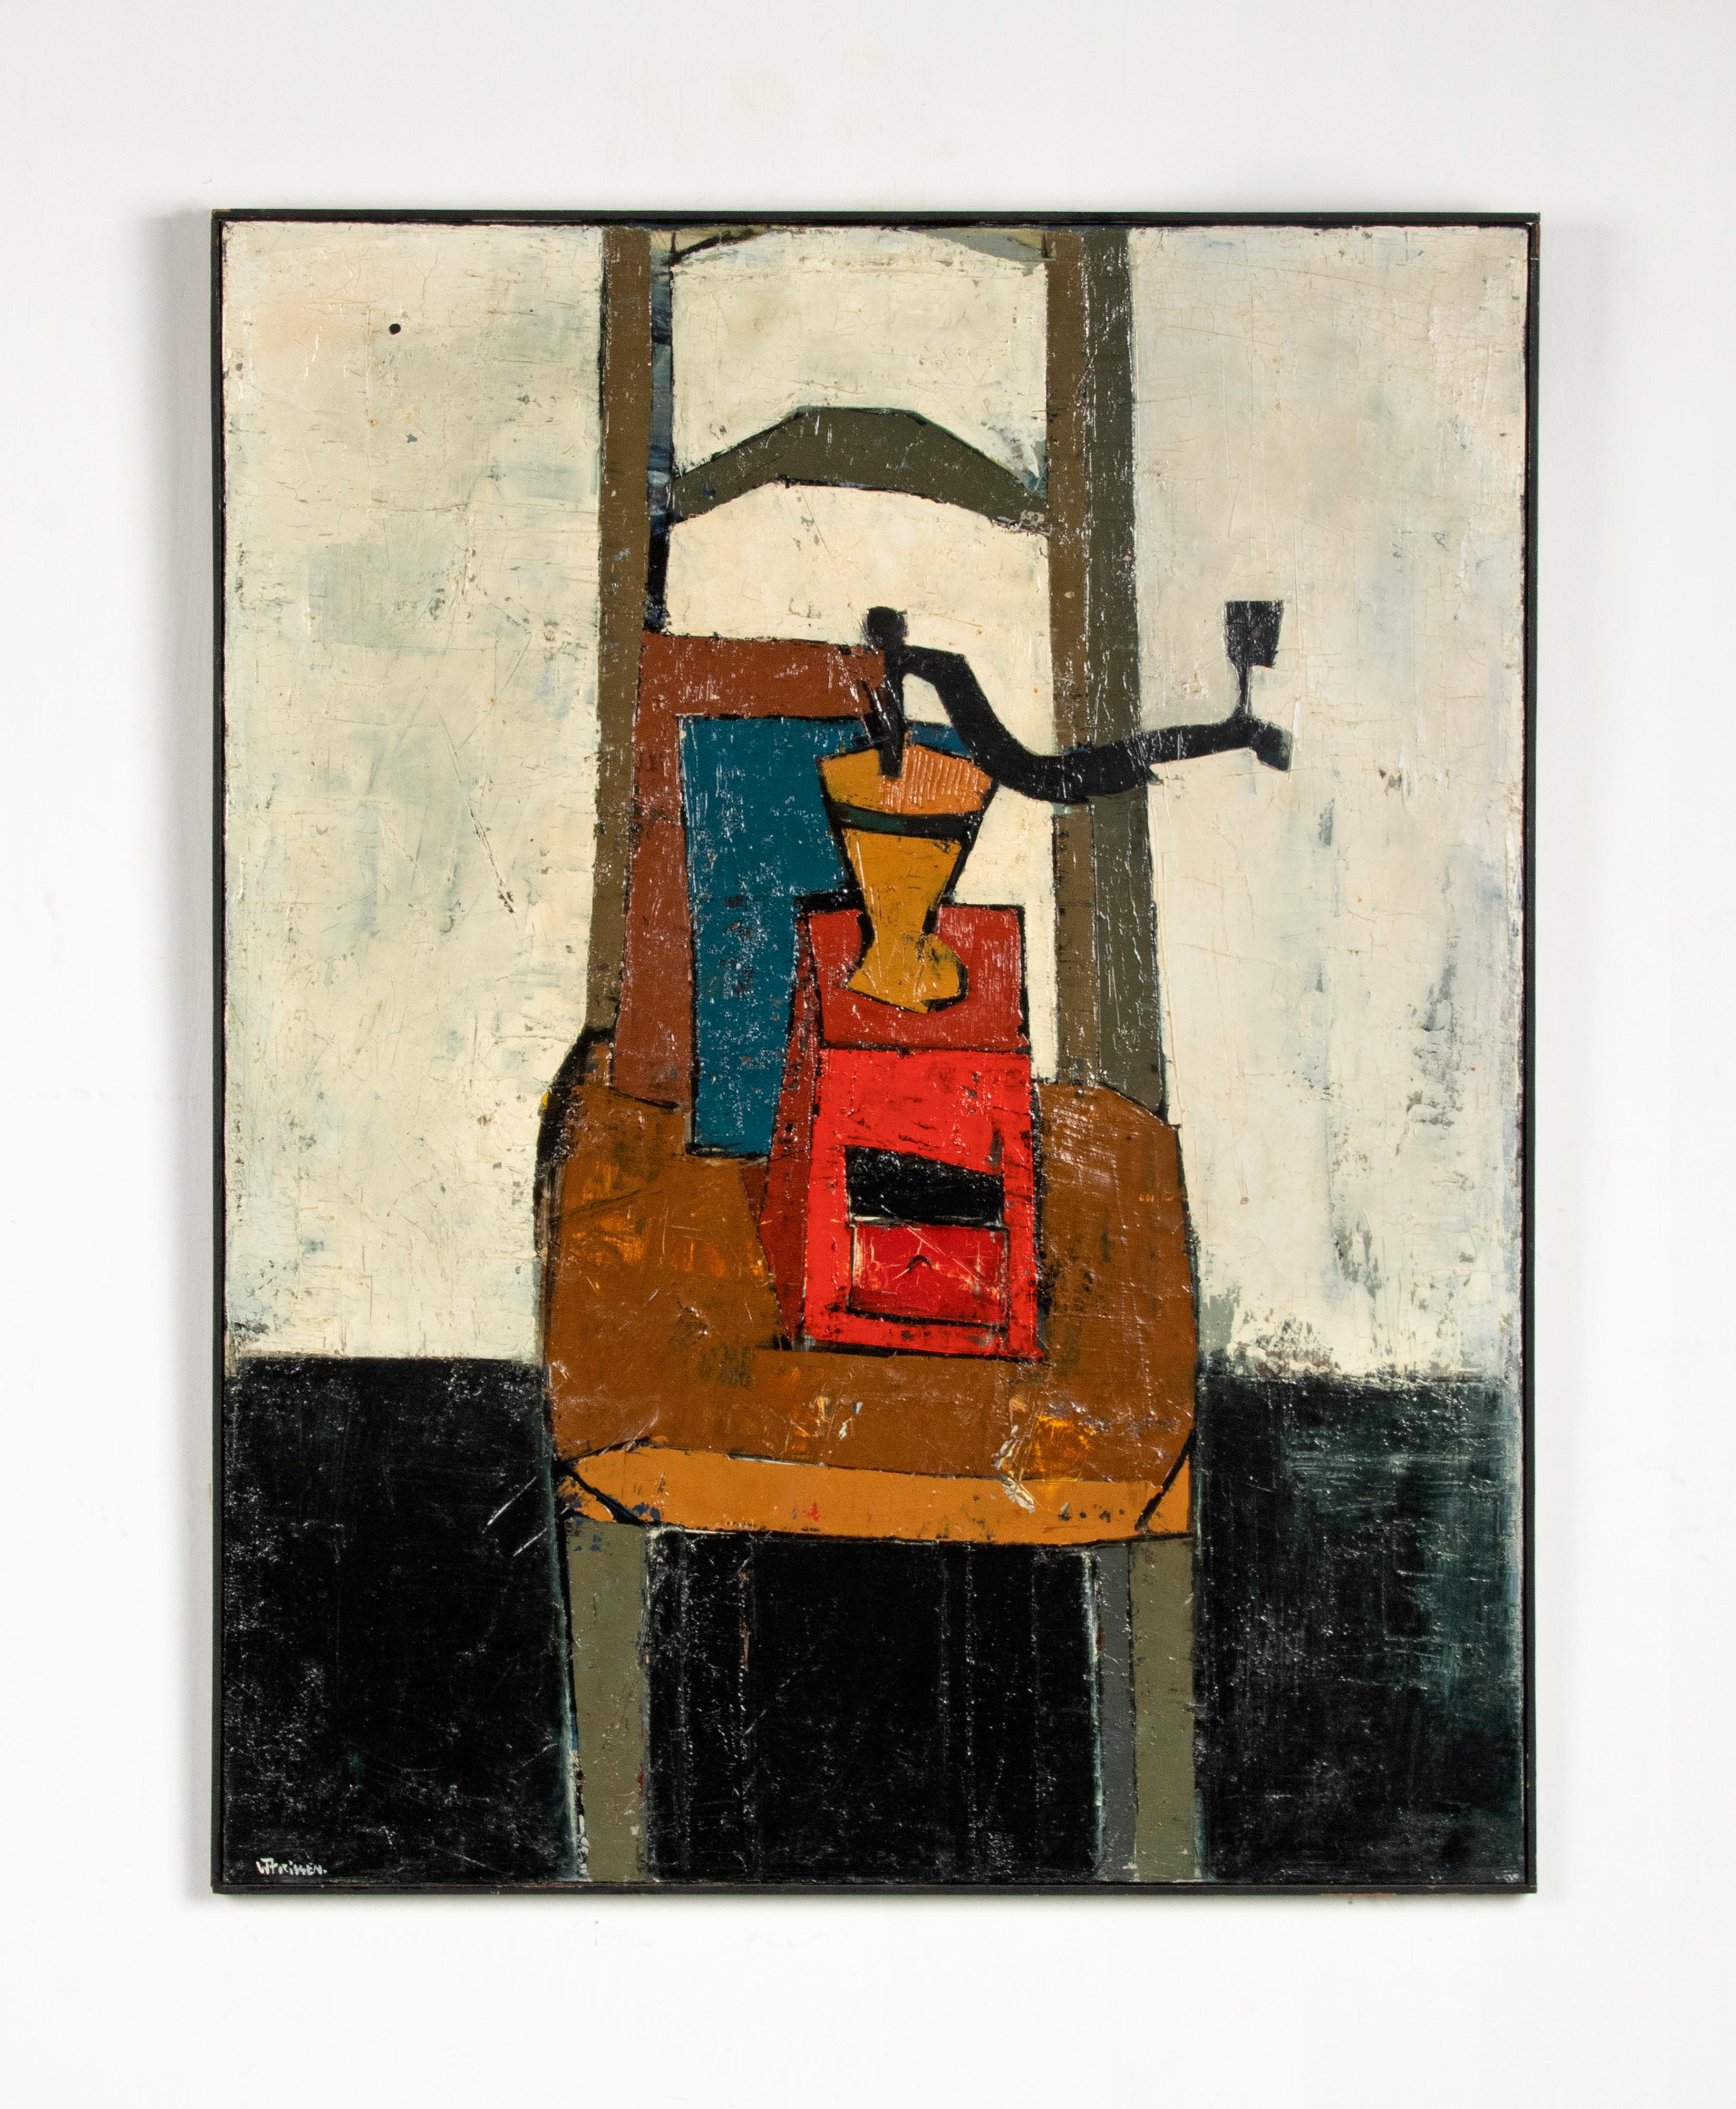 European Mid-Century Modern Painting Still Life with Chair by Willy Frissen